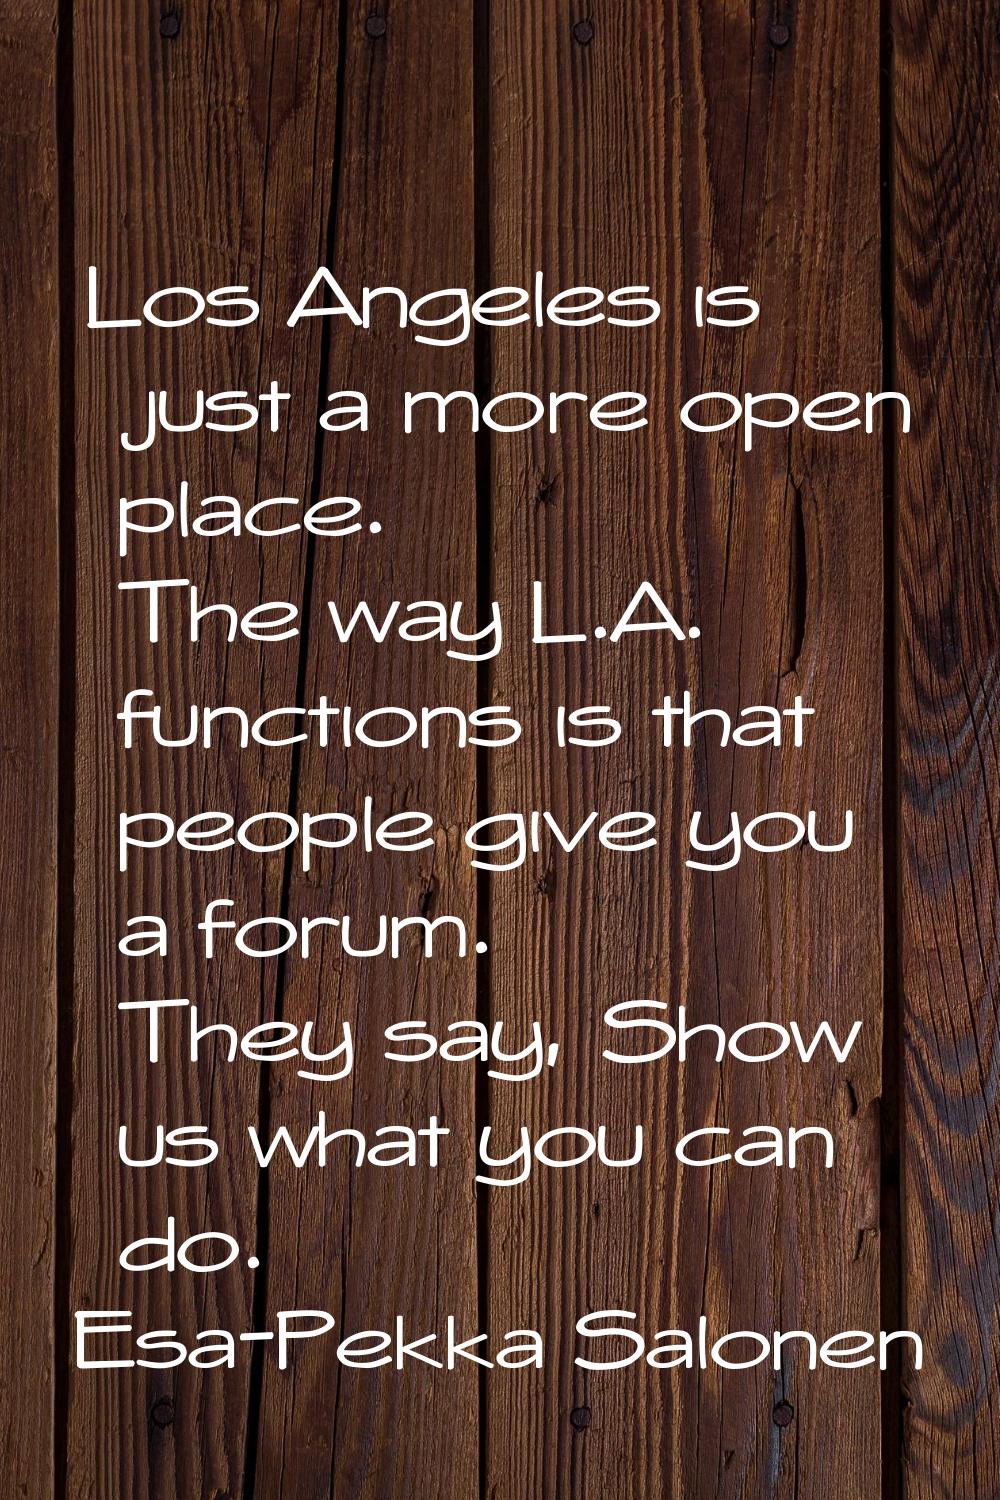 Los Angeles is just a more open place. The way L.A. functions is that people give you a forum. They